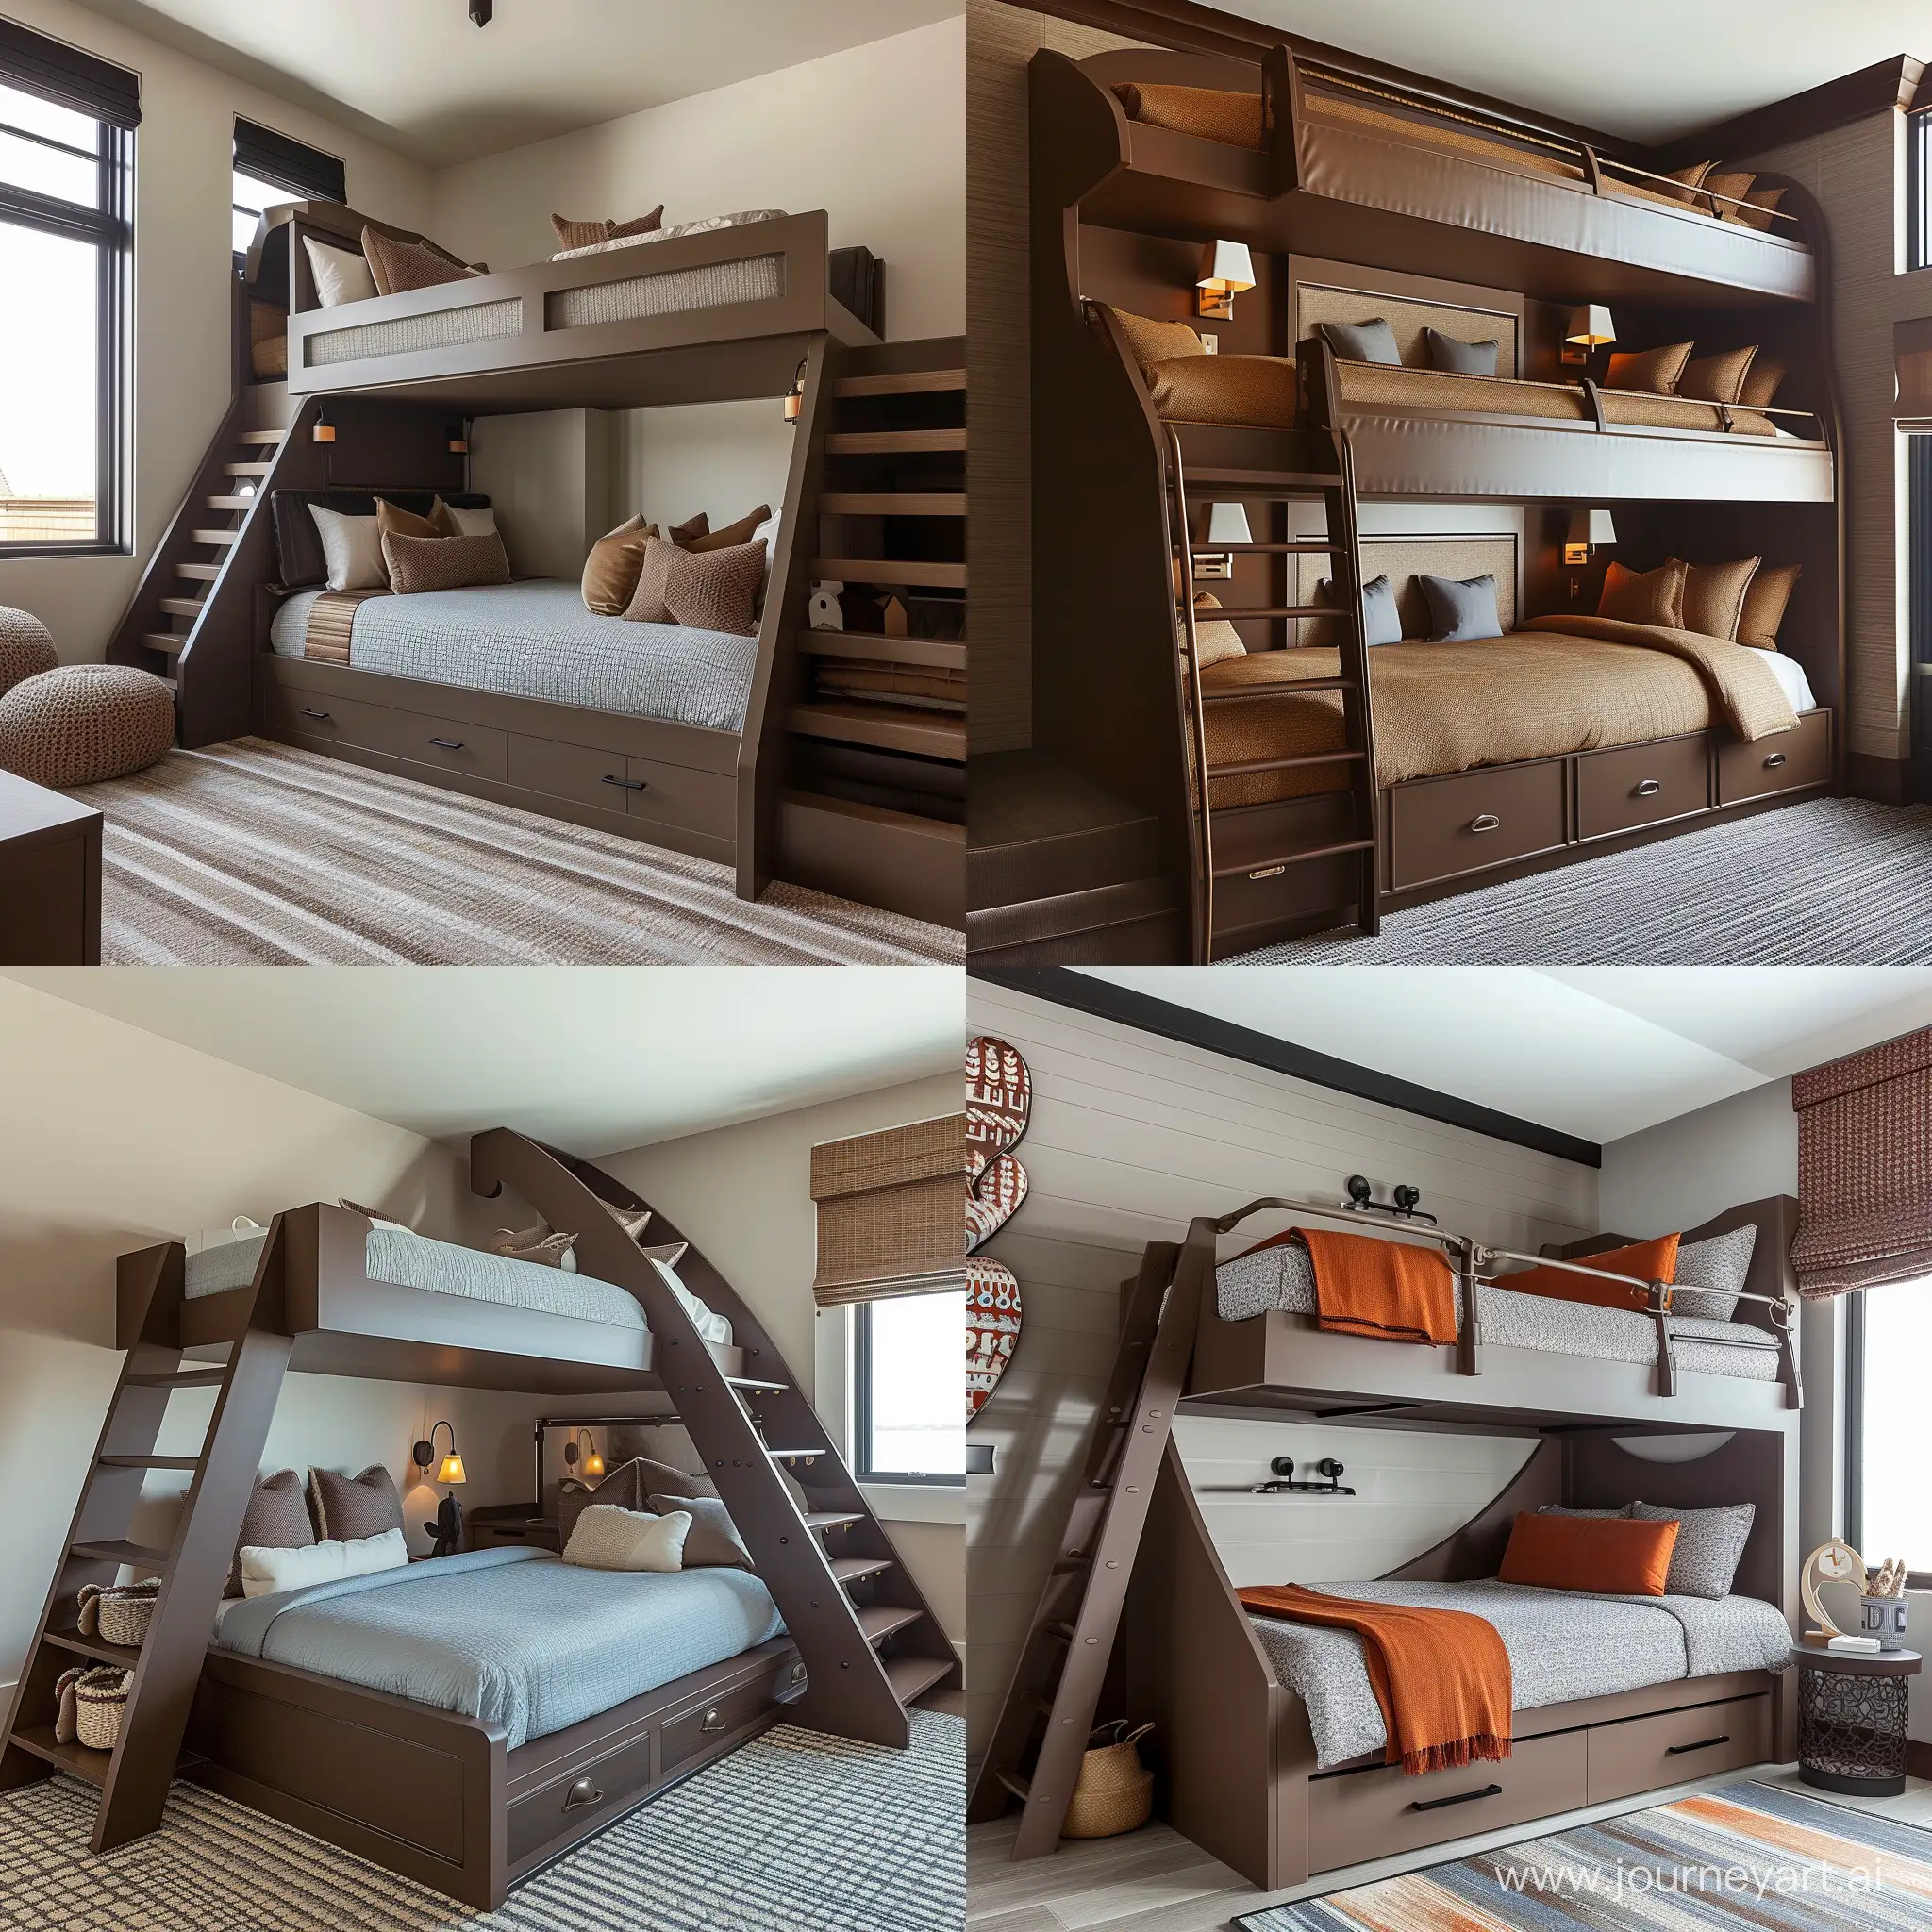 Children's bedroom with contemporary, chocolate-colored bunk beds
 --v 6 --ar 1:1 --no 48132